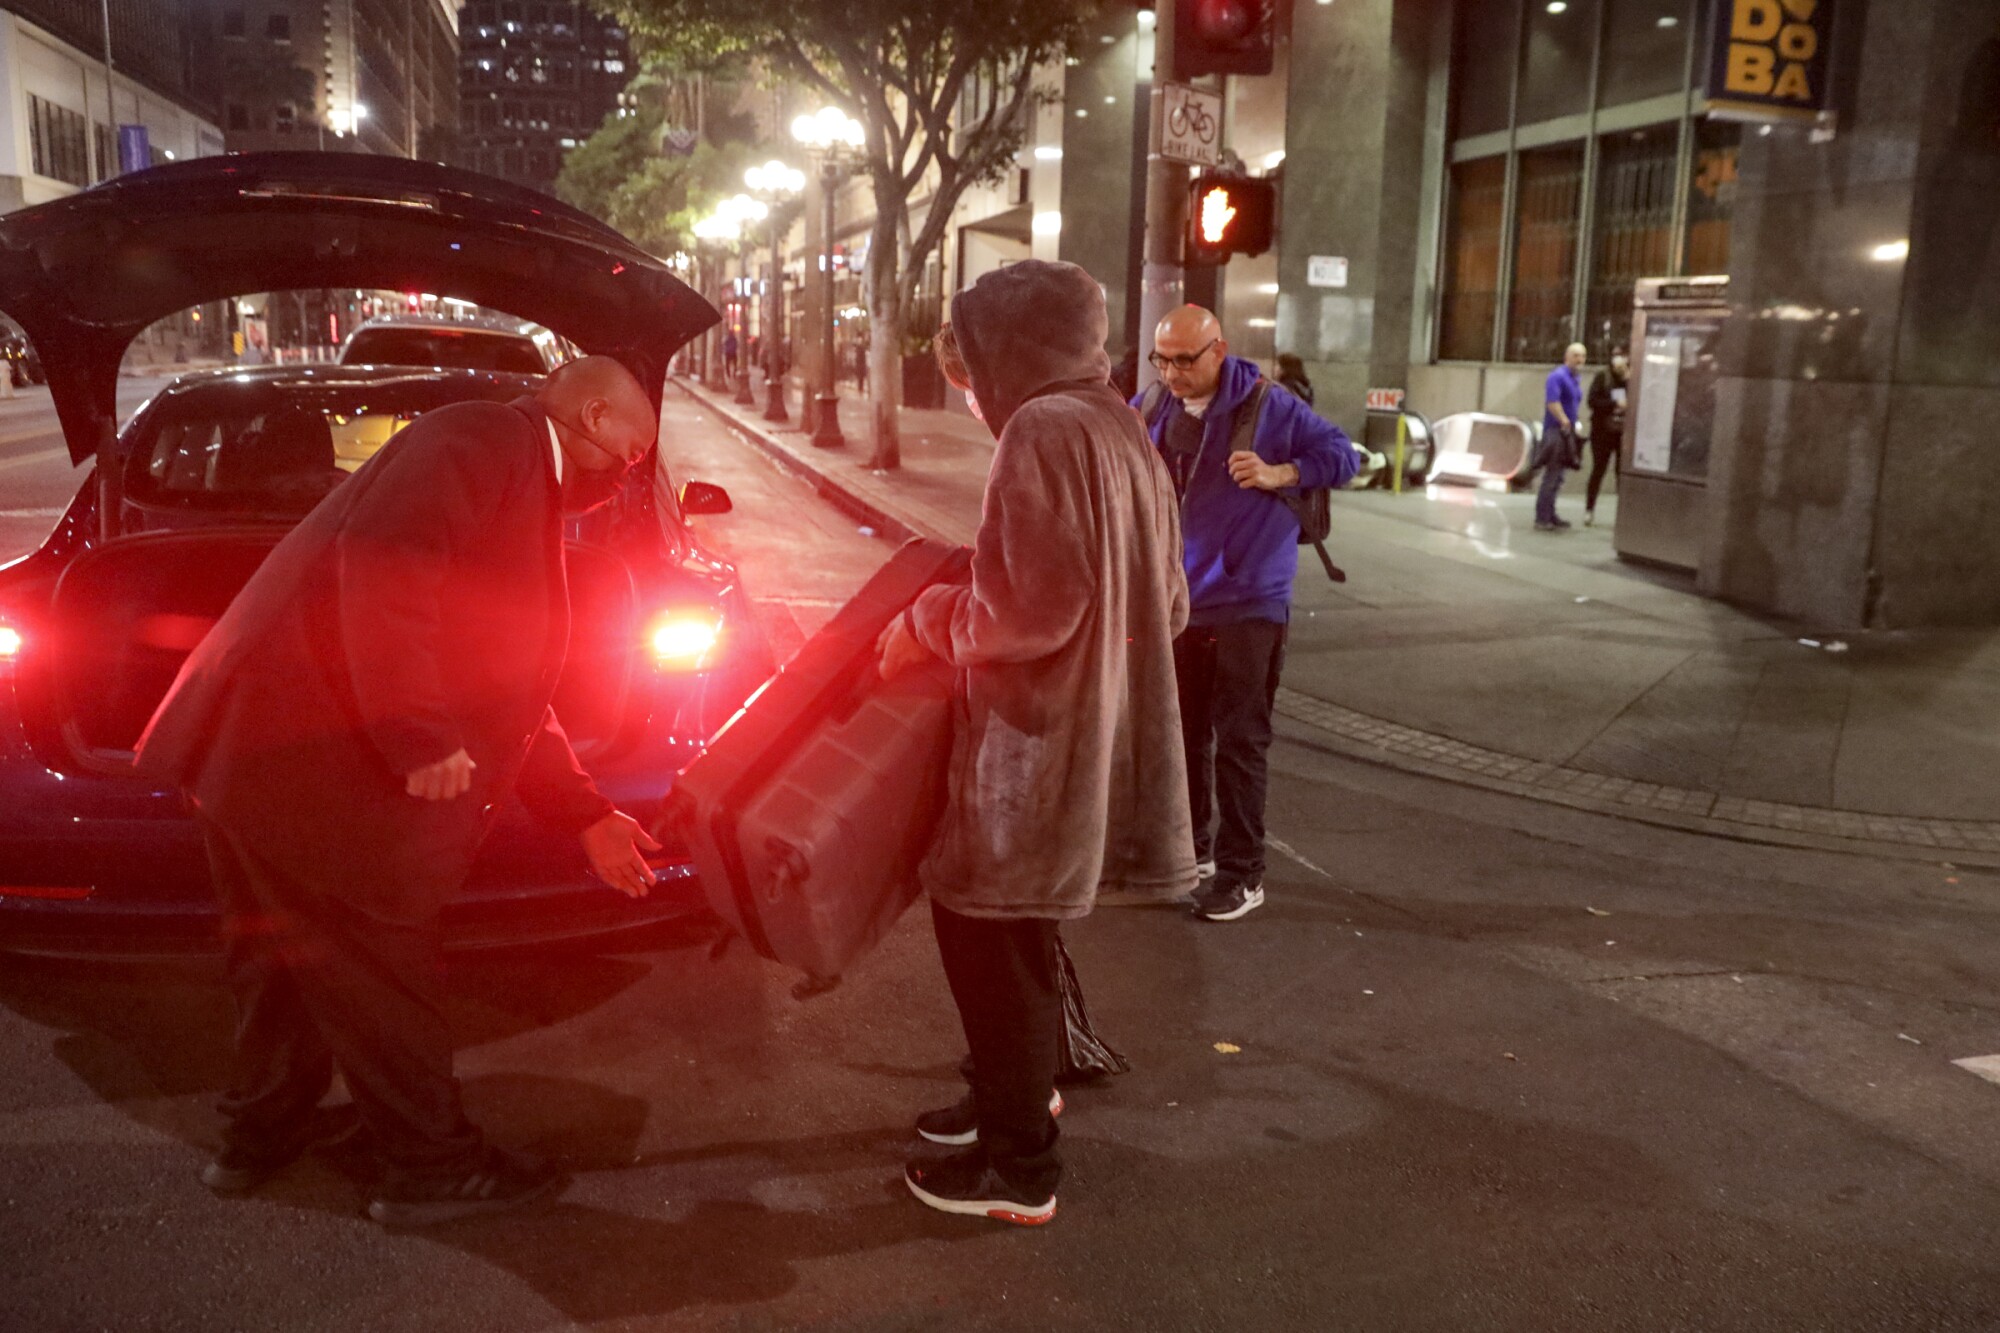 A homeless person leaves for a shelter by Uber, arranged by People Assisting the Homeless 